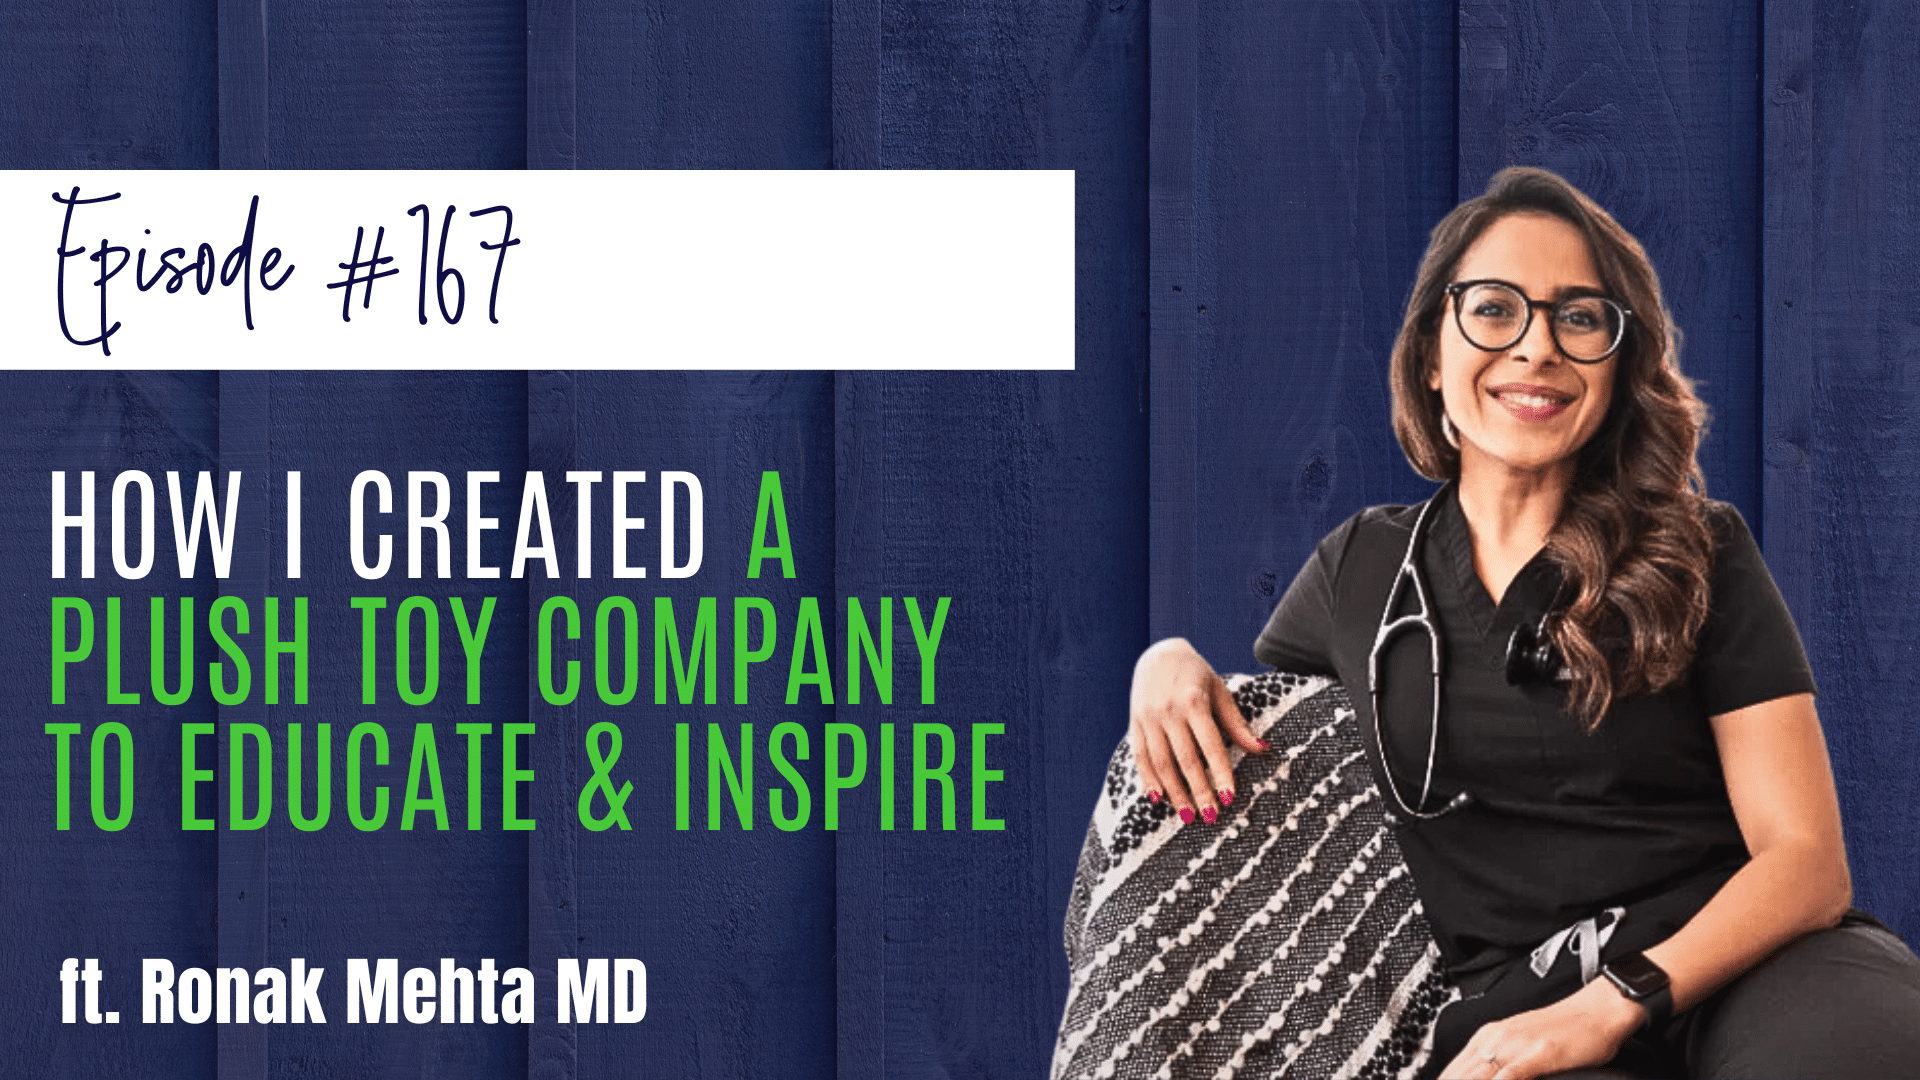 #167 How I Created a Plush Toy Company to Educate & Inspire, ft. Ronak Mehta MD